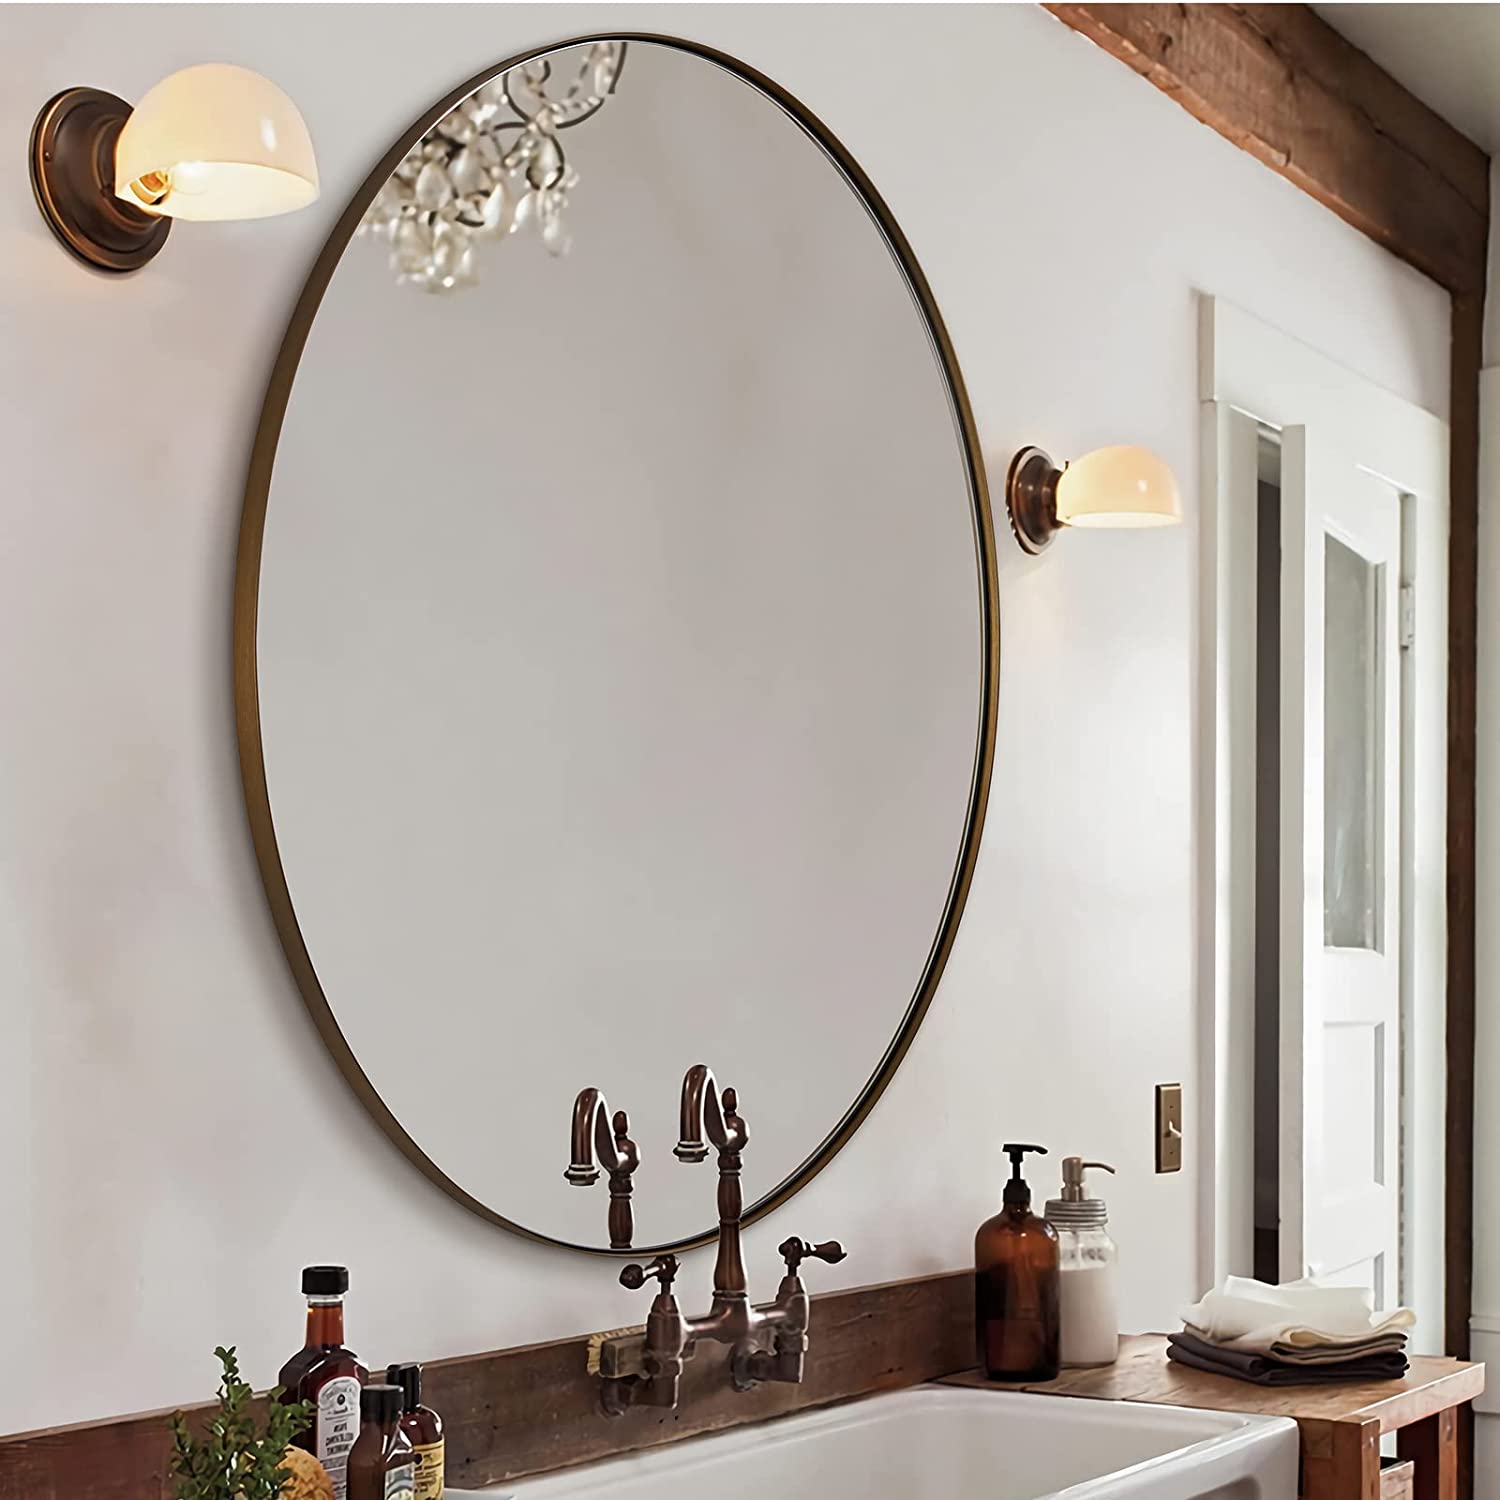 Modern Bathroom Oval Vanity Mirrors |Stainless Steel Frame Mounted Horizontal or Vertical#color_brushed bronze